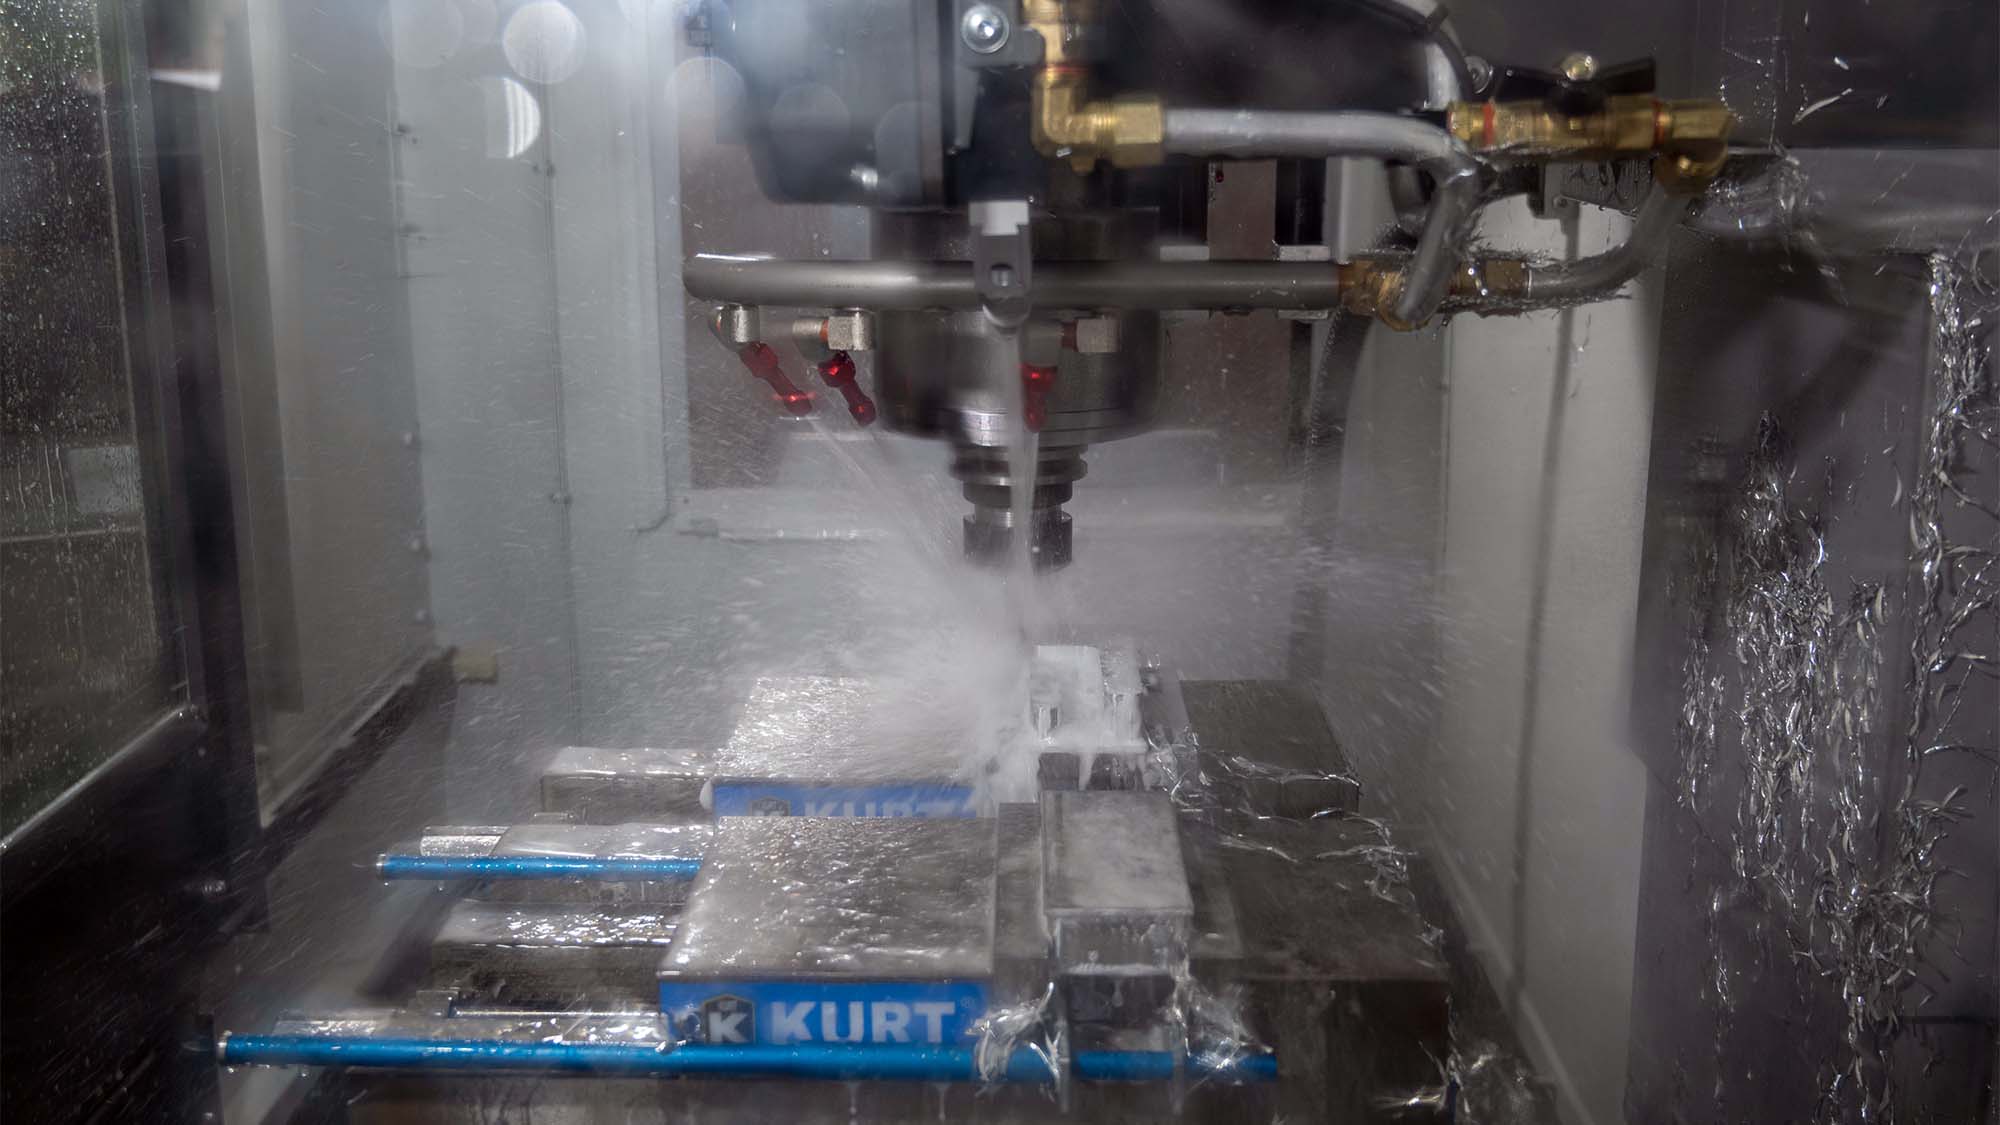 CNC machine shoots jets of water